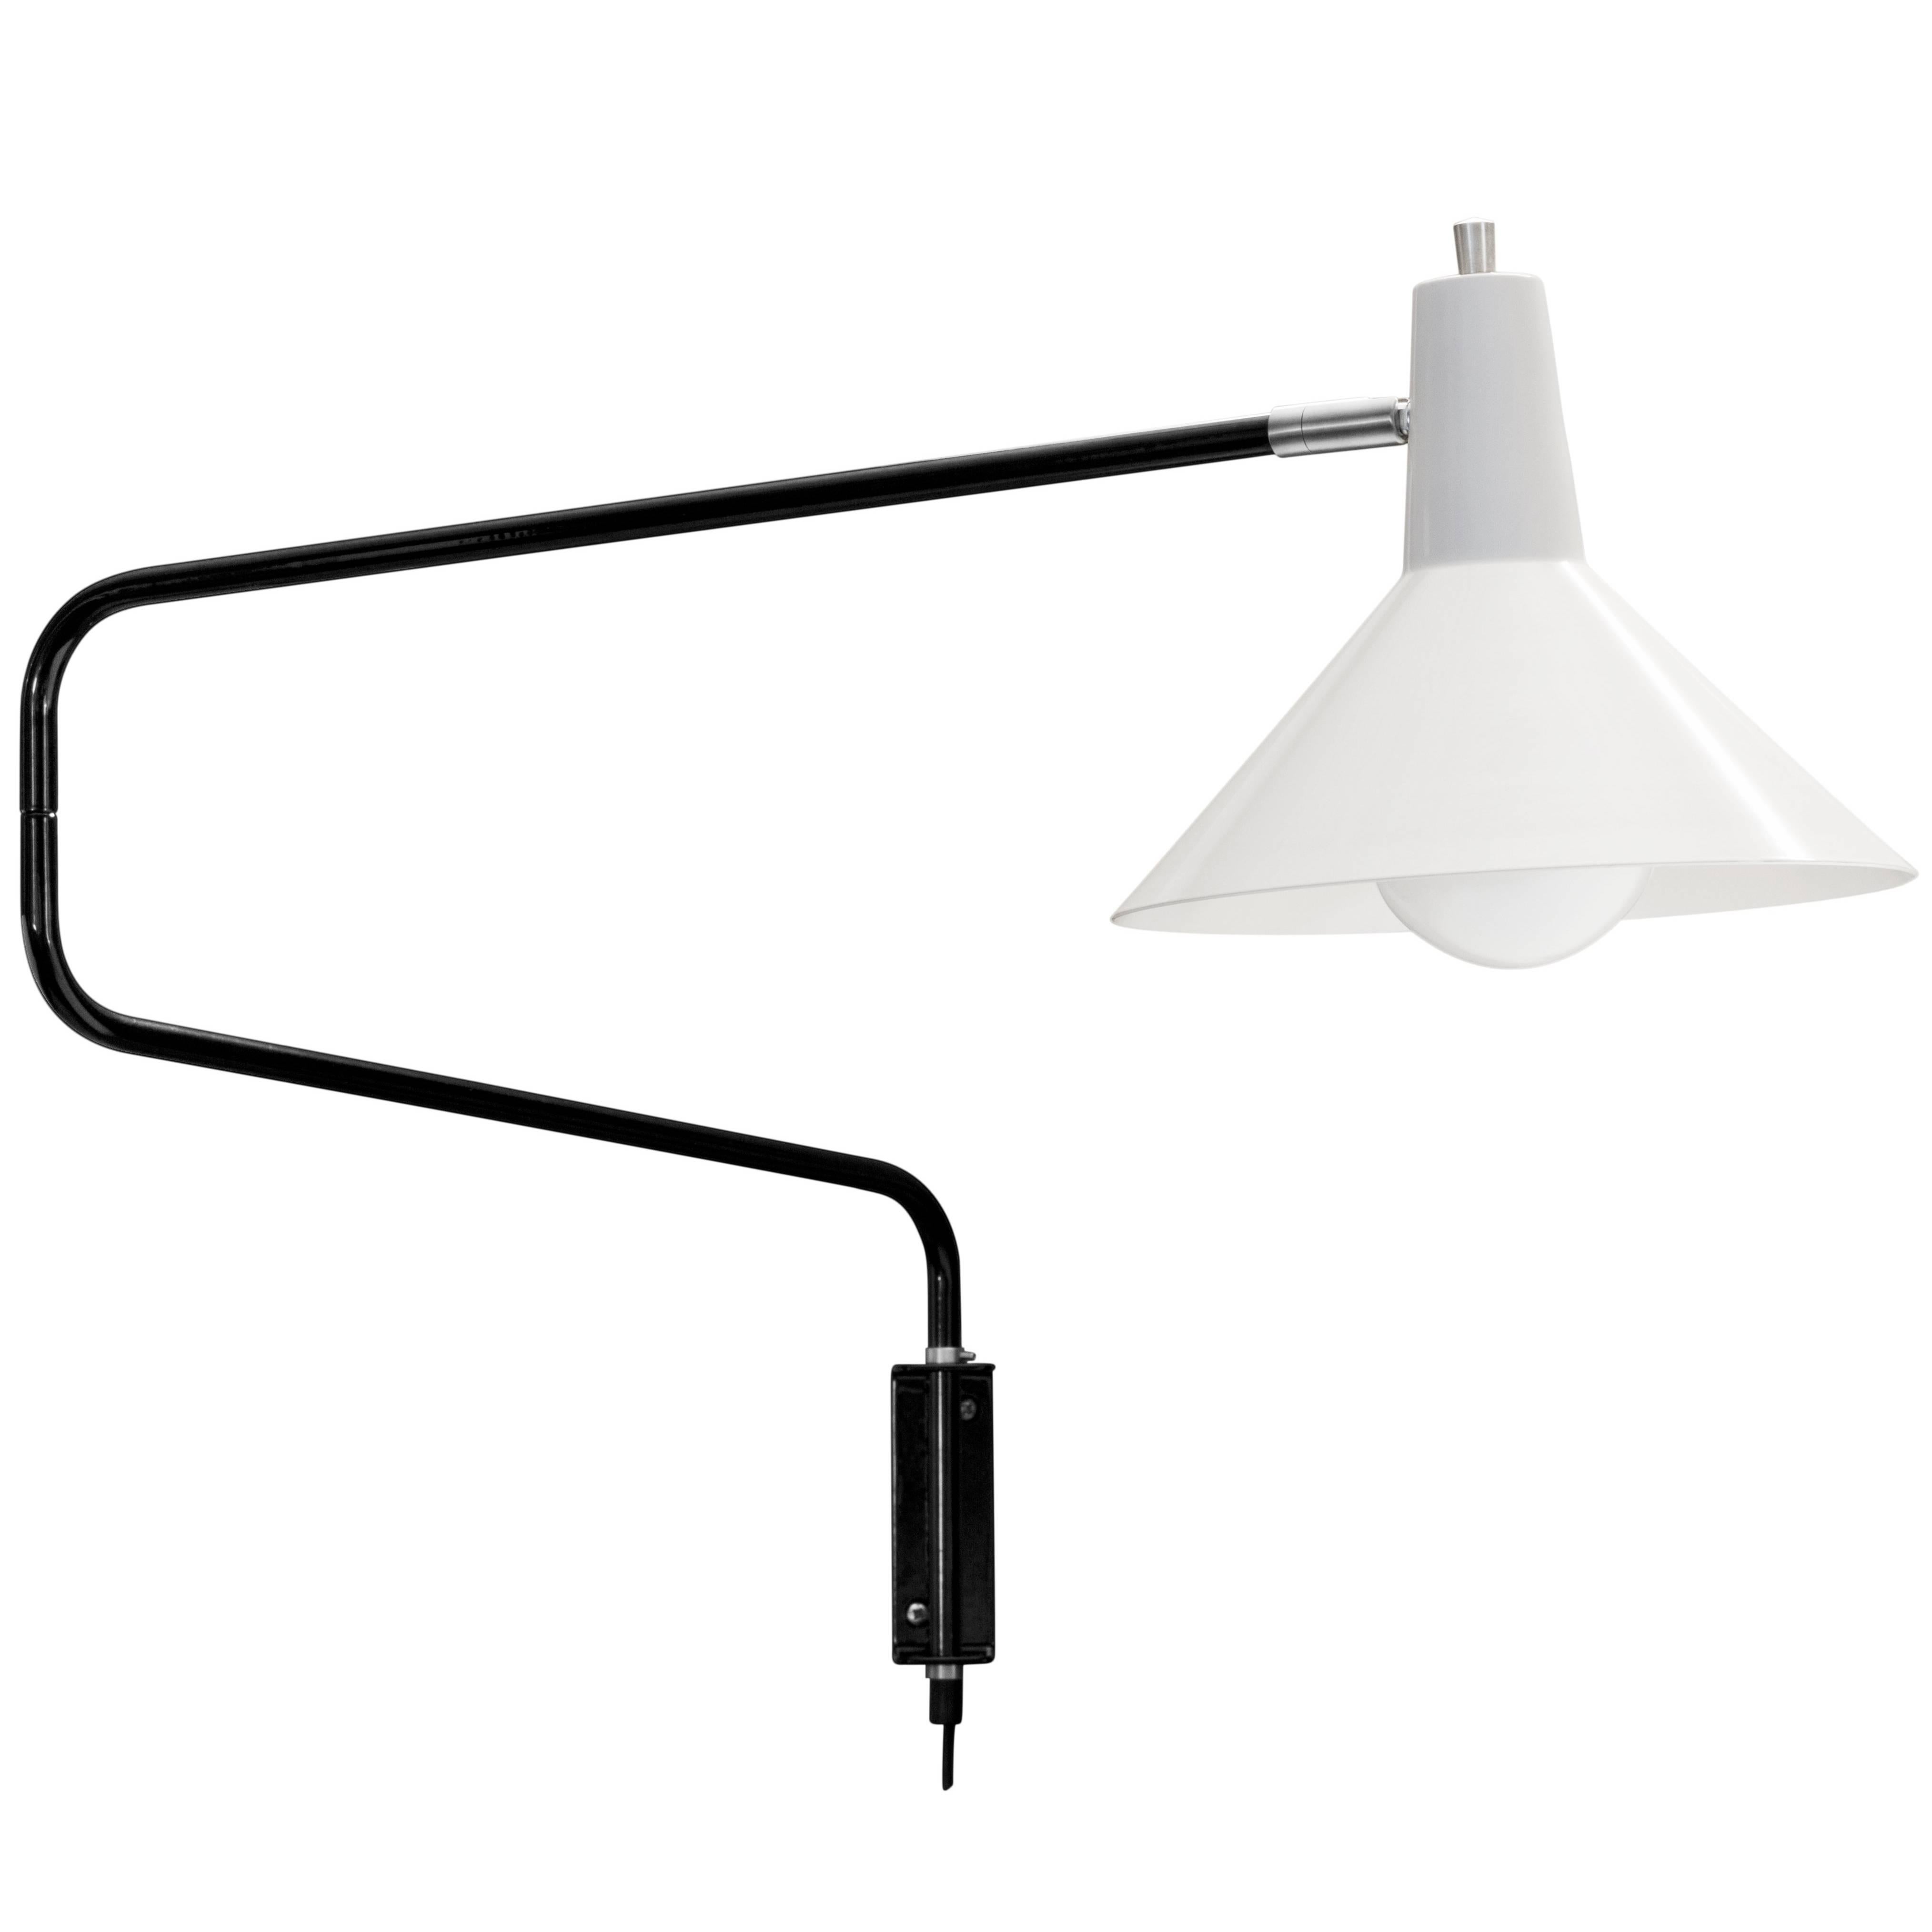 J.J.M. Hoogervorst gray paperclip wall light for Anvia. Hoogervorst's most popular 1950s design, this lamp remains a highly sought after icon of Dutch modernism. The 'elbow' arm when folded measures 27.5 in. wide, but can be extended to a maximum